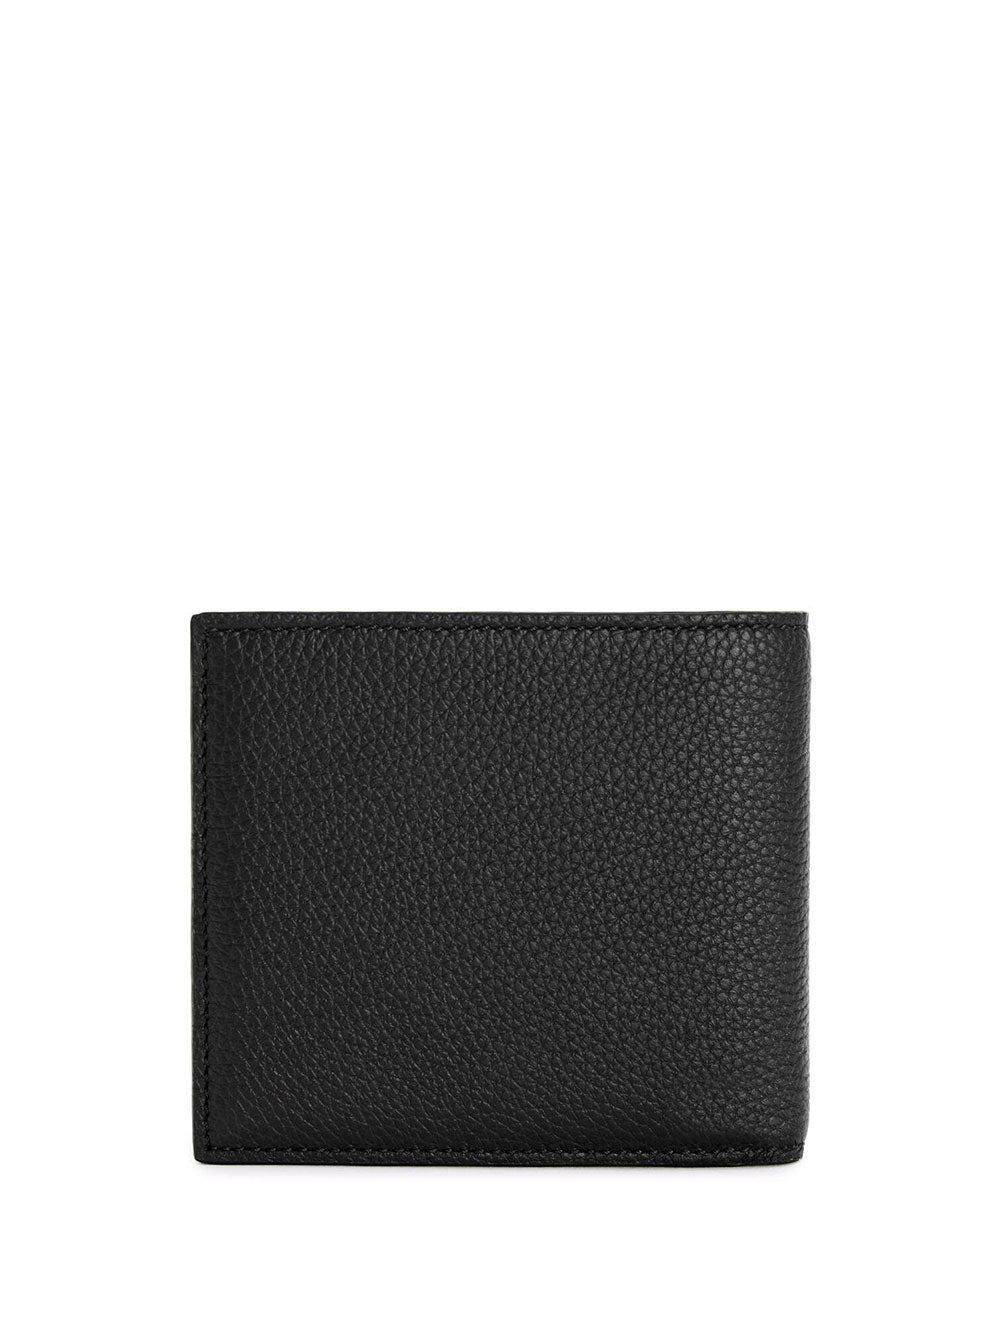 Grained calf leather wallet